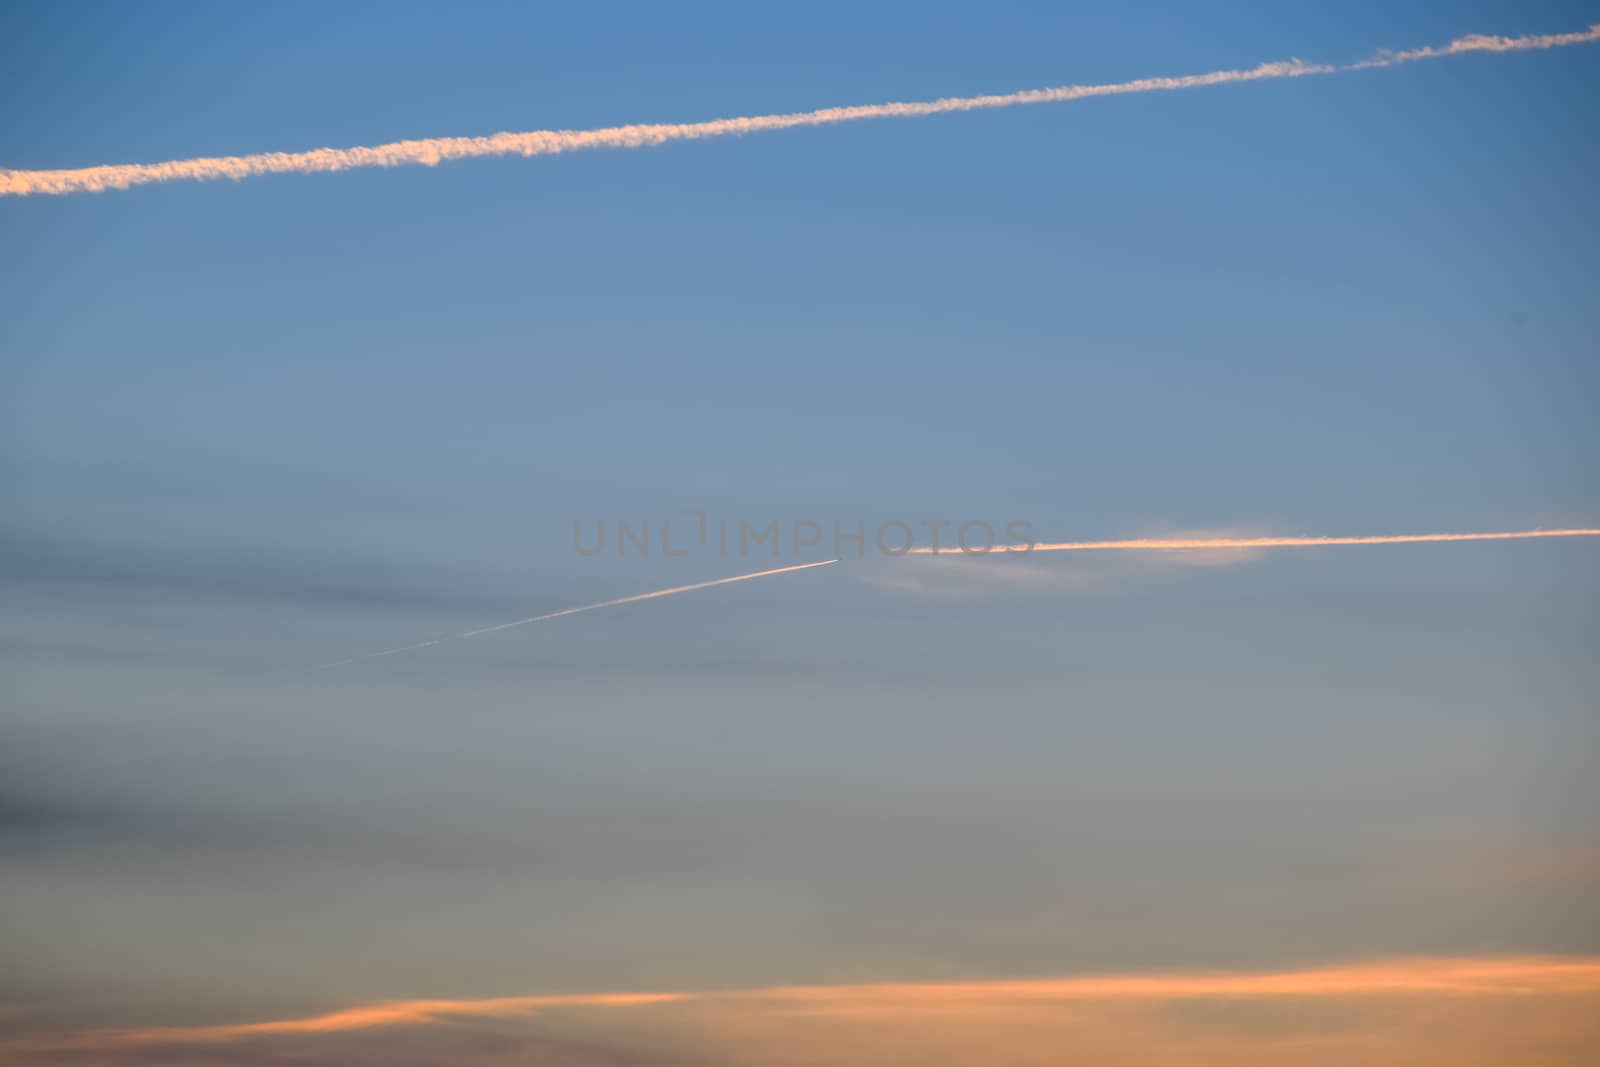 Contrail from an airplane on a blue sky against a sunset.